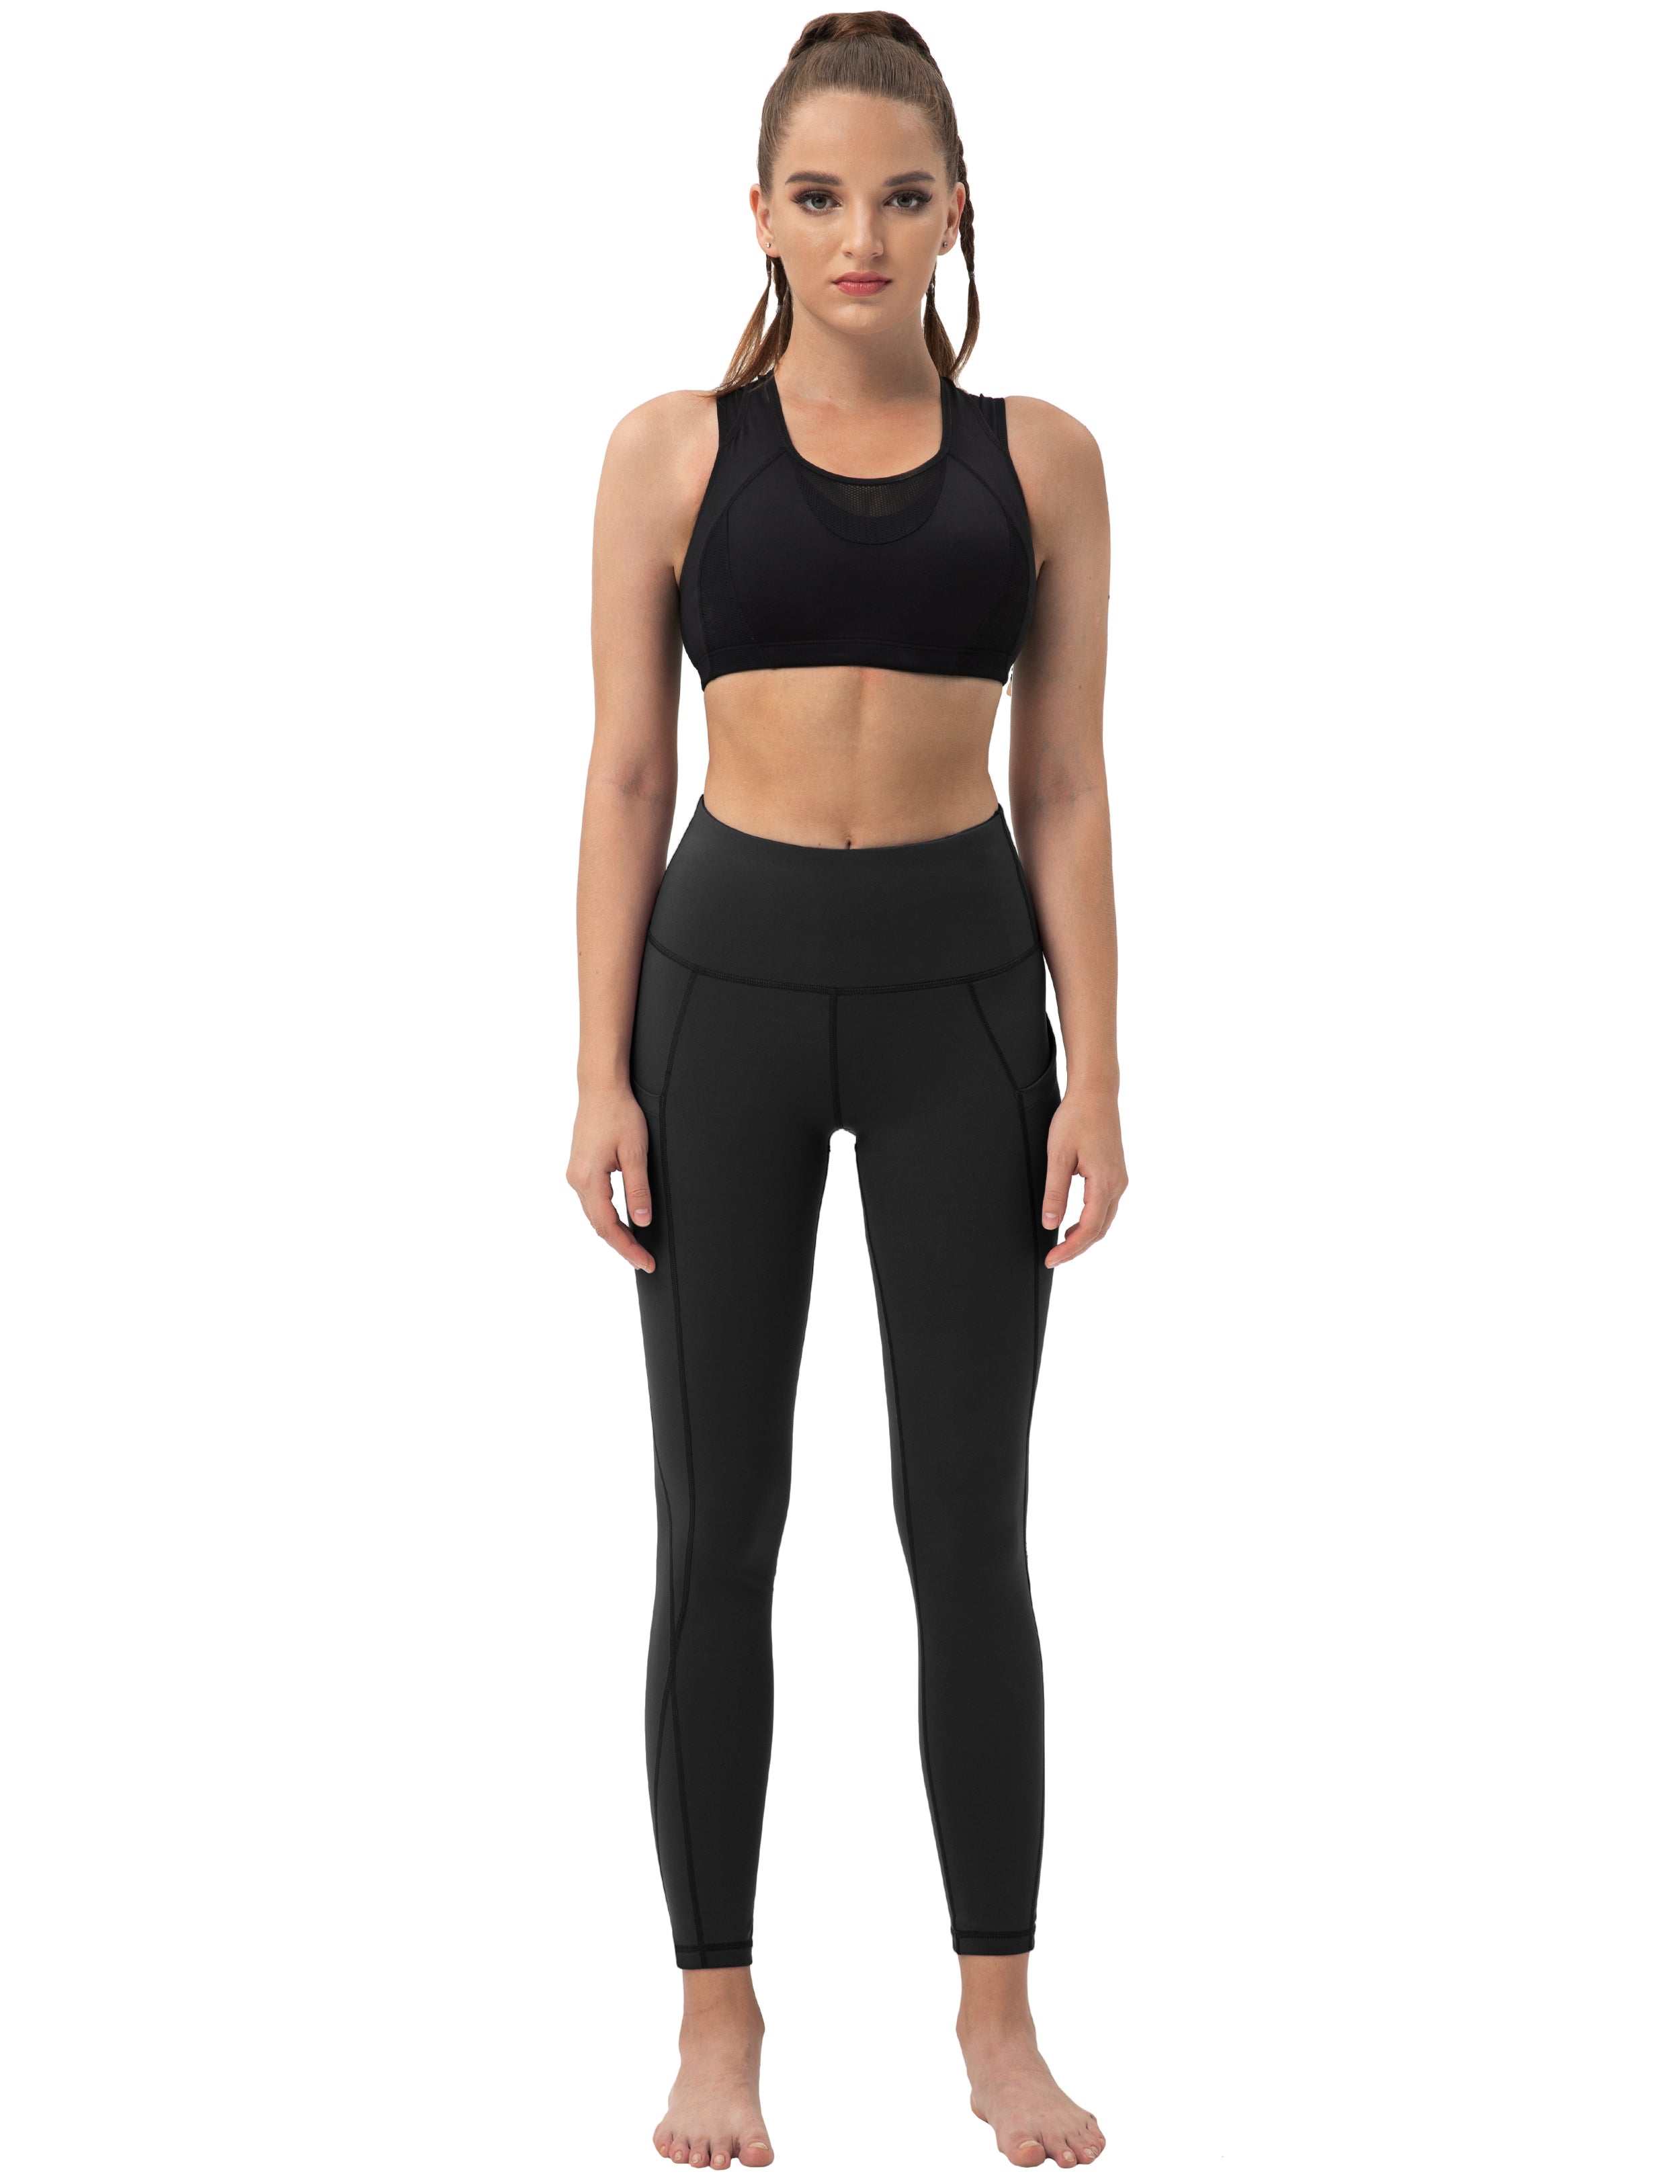 High Waist Side Pockets yogastudio Pants black 75% Nylon, 25% Spandex Fabric doesn't attract lint easily 4-way stretch No see-through Moisture-wicking Tummy control Inner pocket